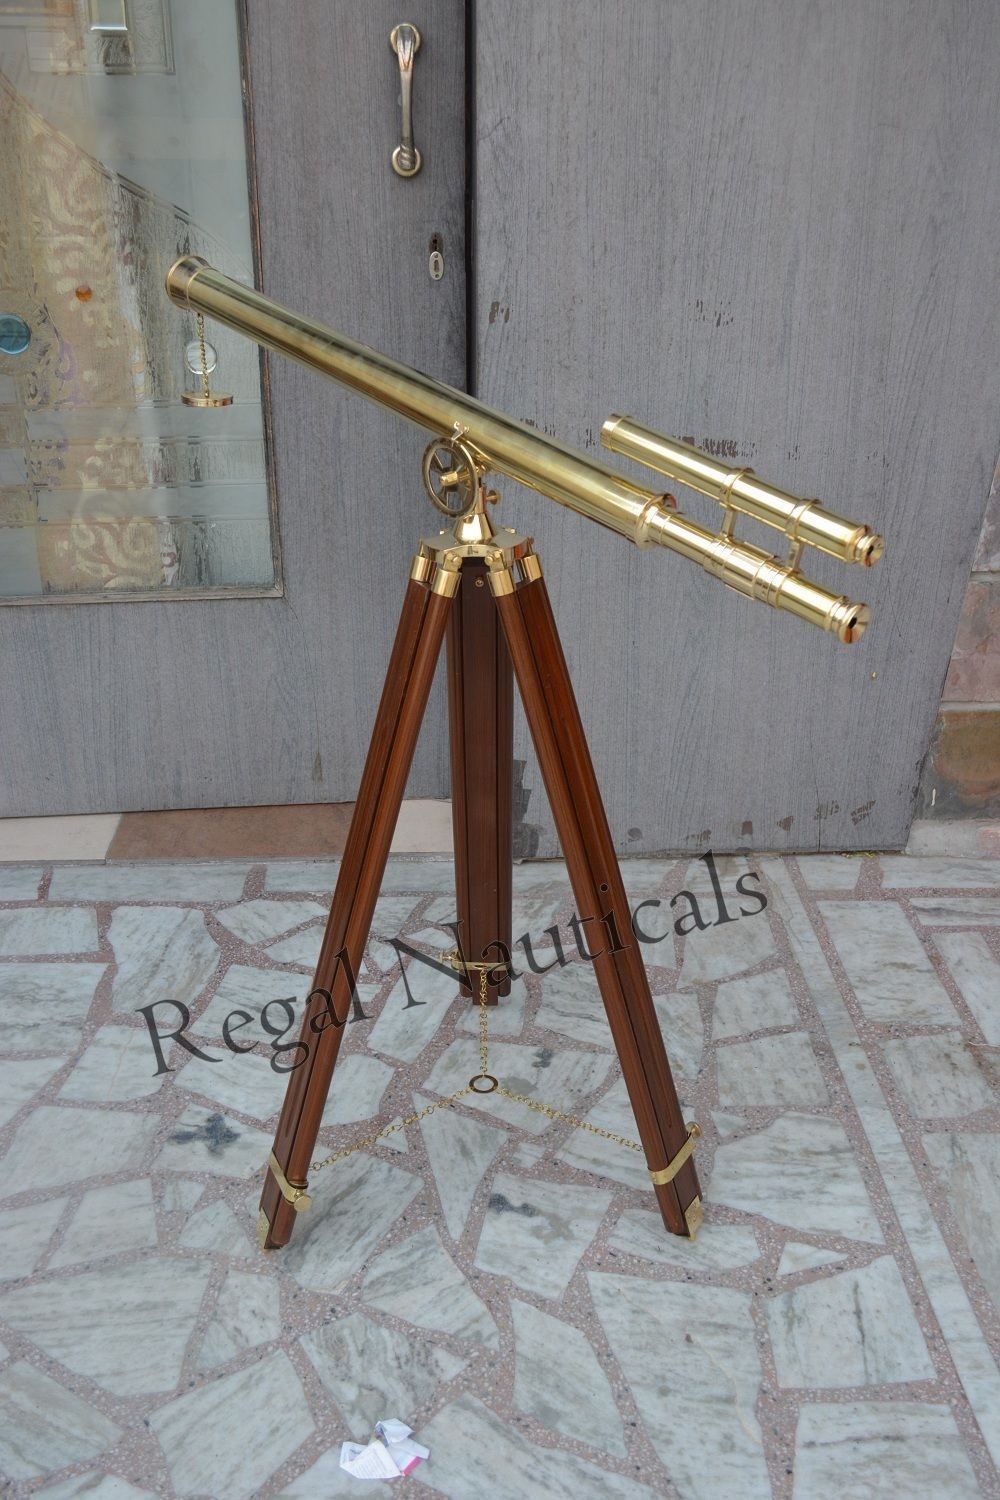 Nautical-Brass-Telescope-Marine-Navy-Double-Barrel-With-Wooden-Tripod-Stand